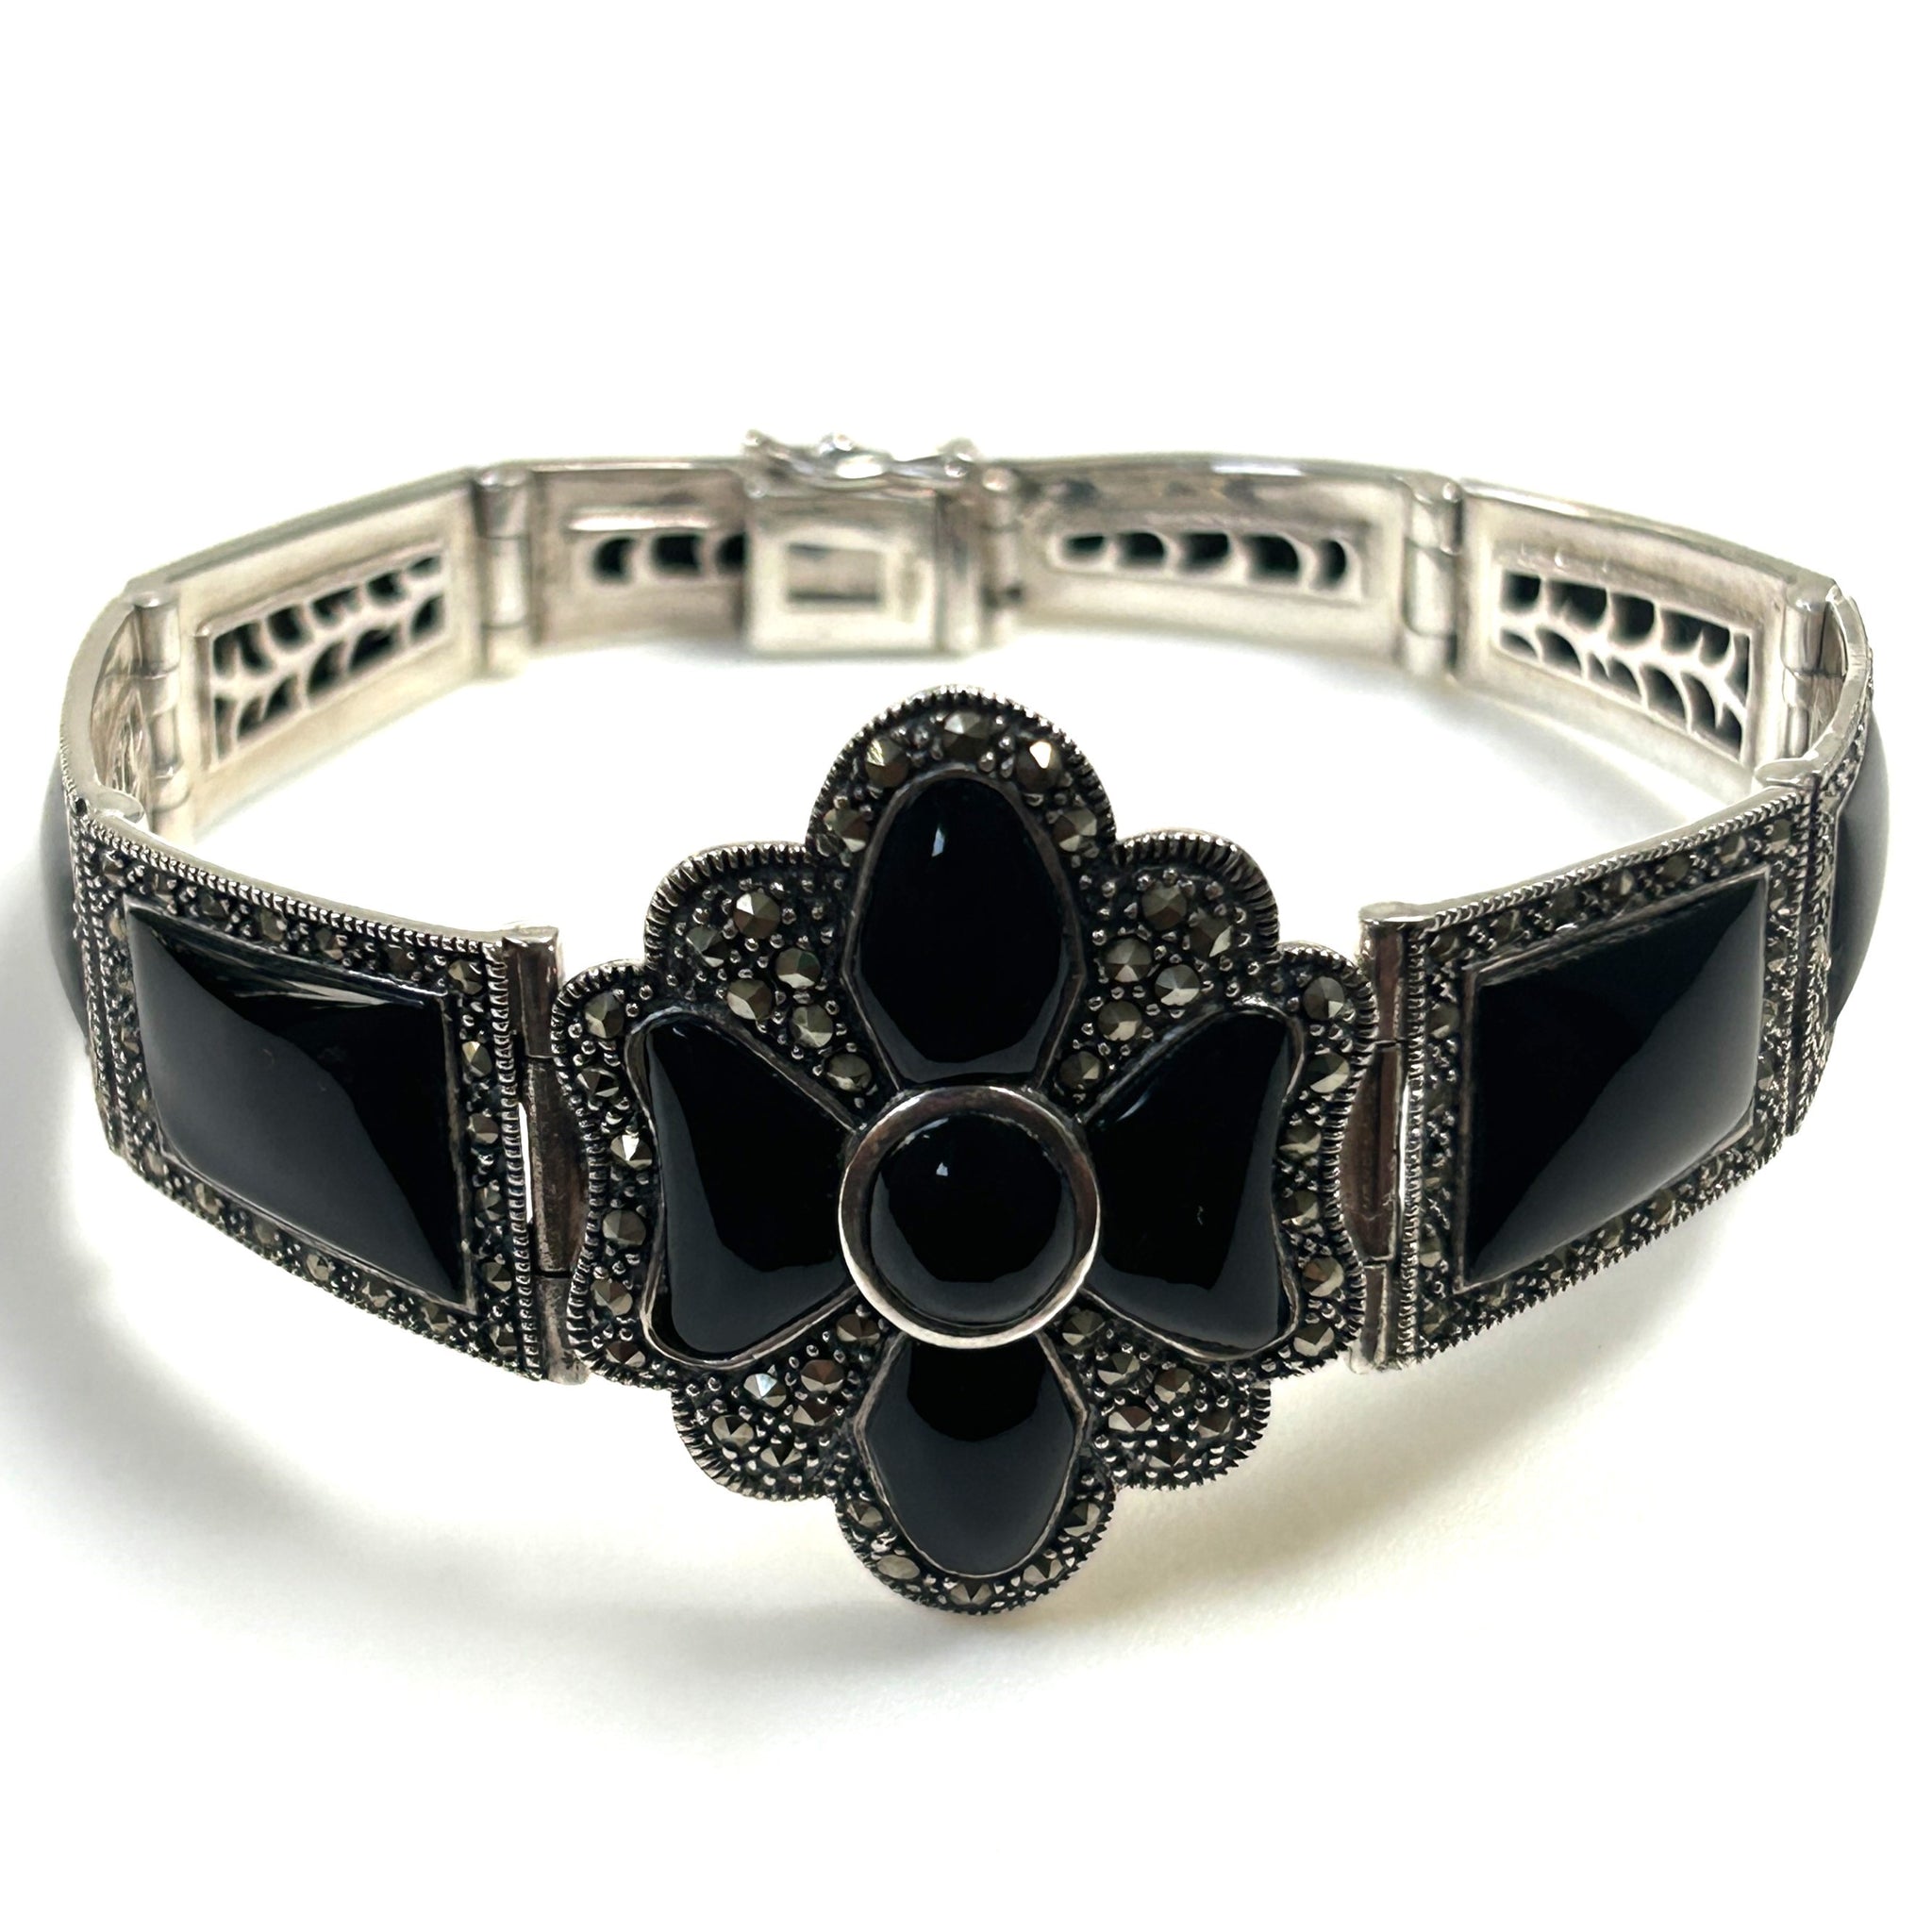 Sterling Silver, Onyx and Marcasite Bracelet – Bancroft Antiques